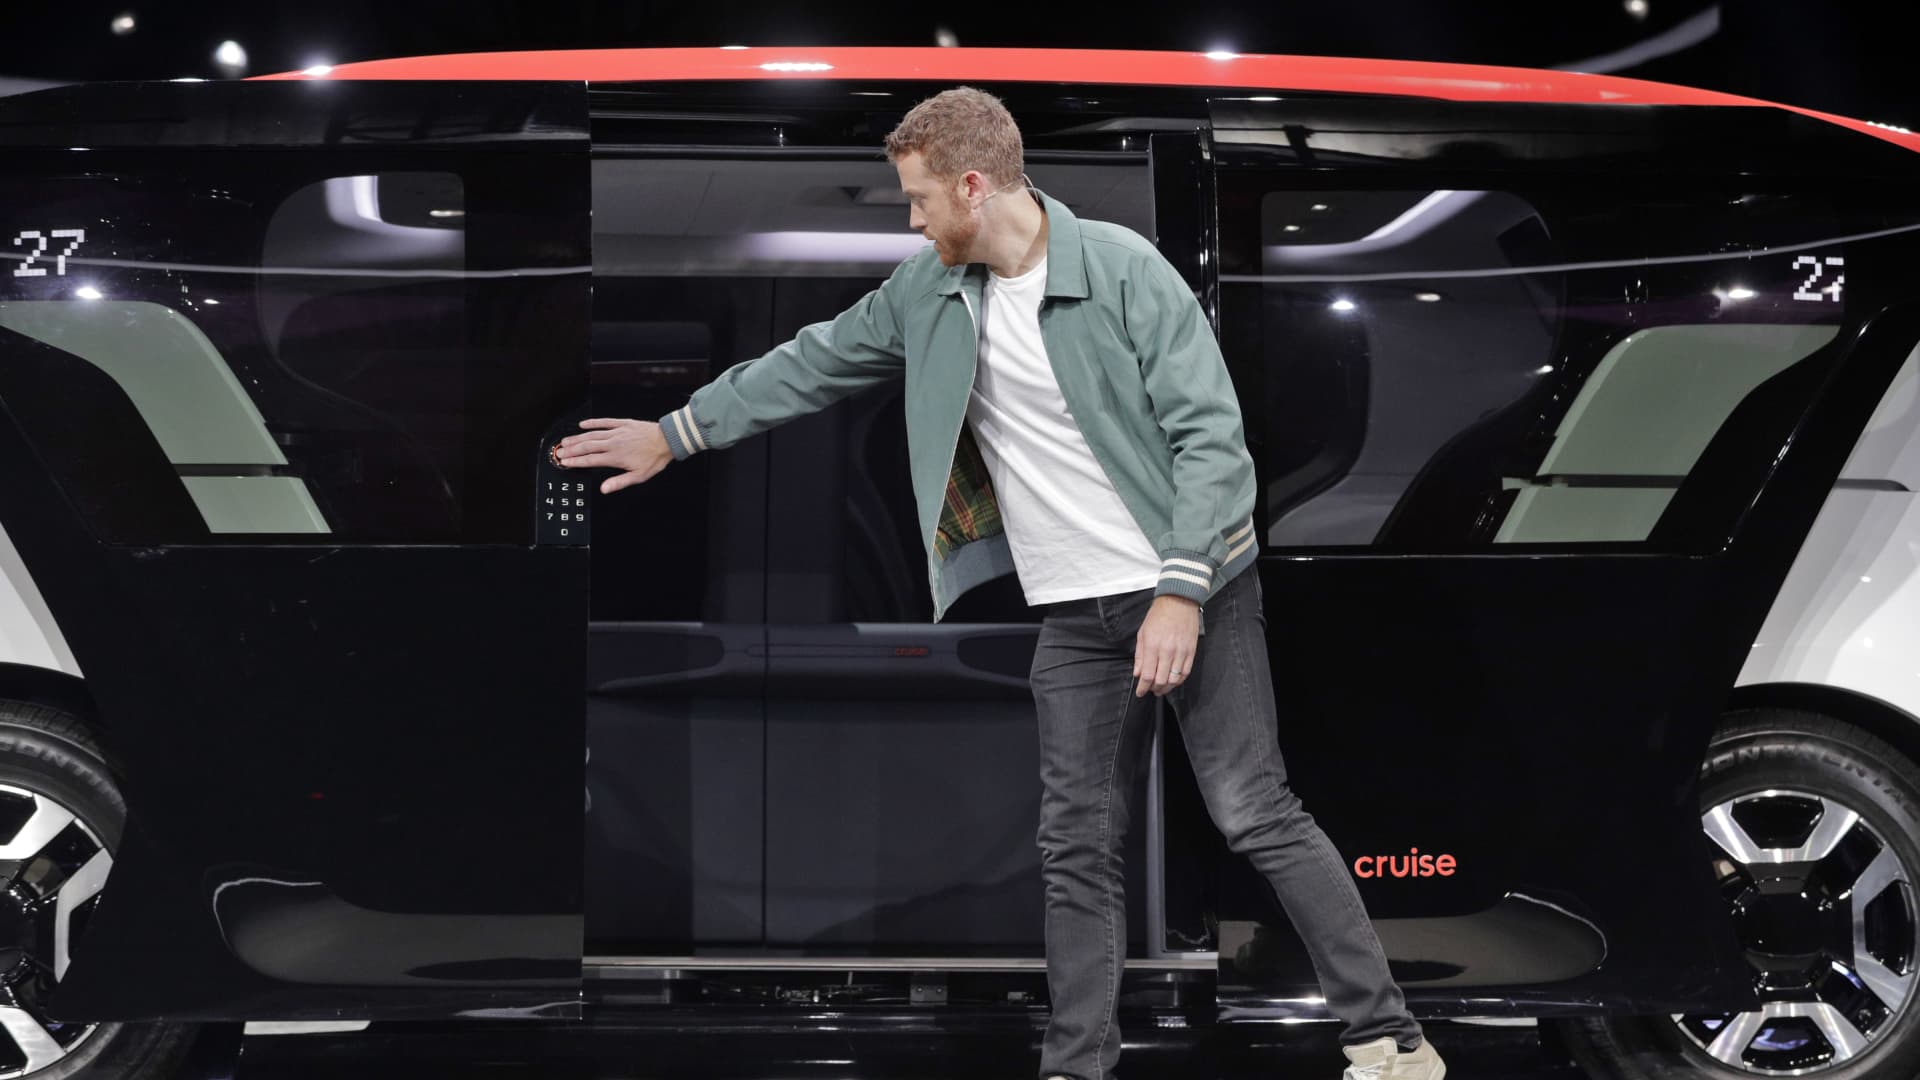 Cruise co-founder Kyle Vogt shows off the push-button opening of the laterally opening doors on the new Cruise Origin, a fully autonomous passenger vehicle, in San Francisco, Jan. 21, 2020.